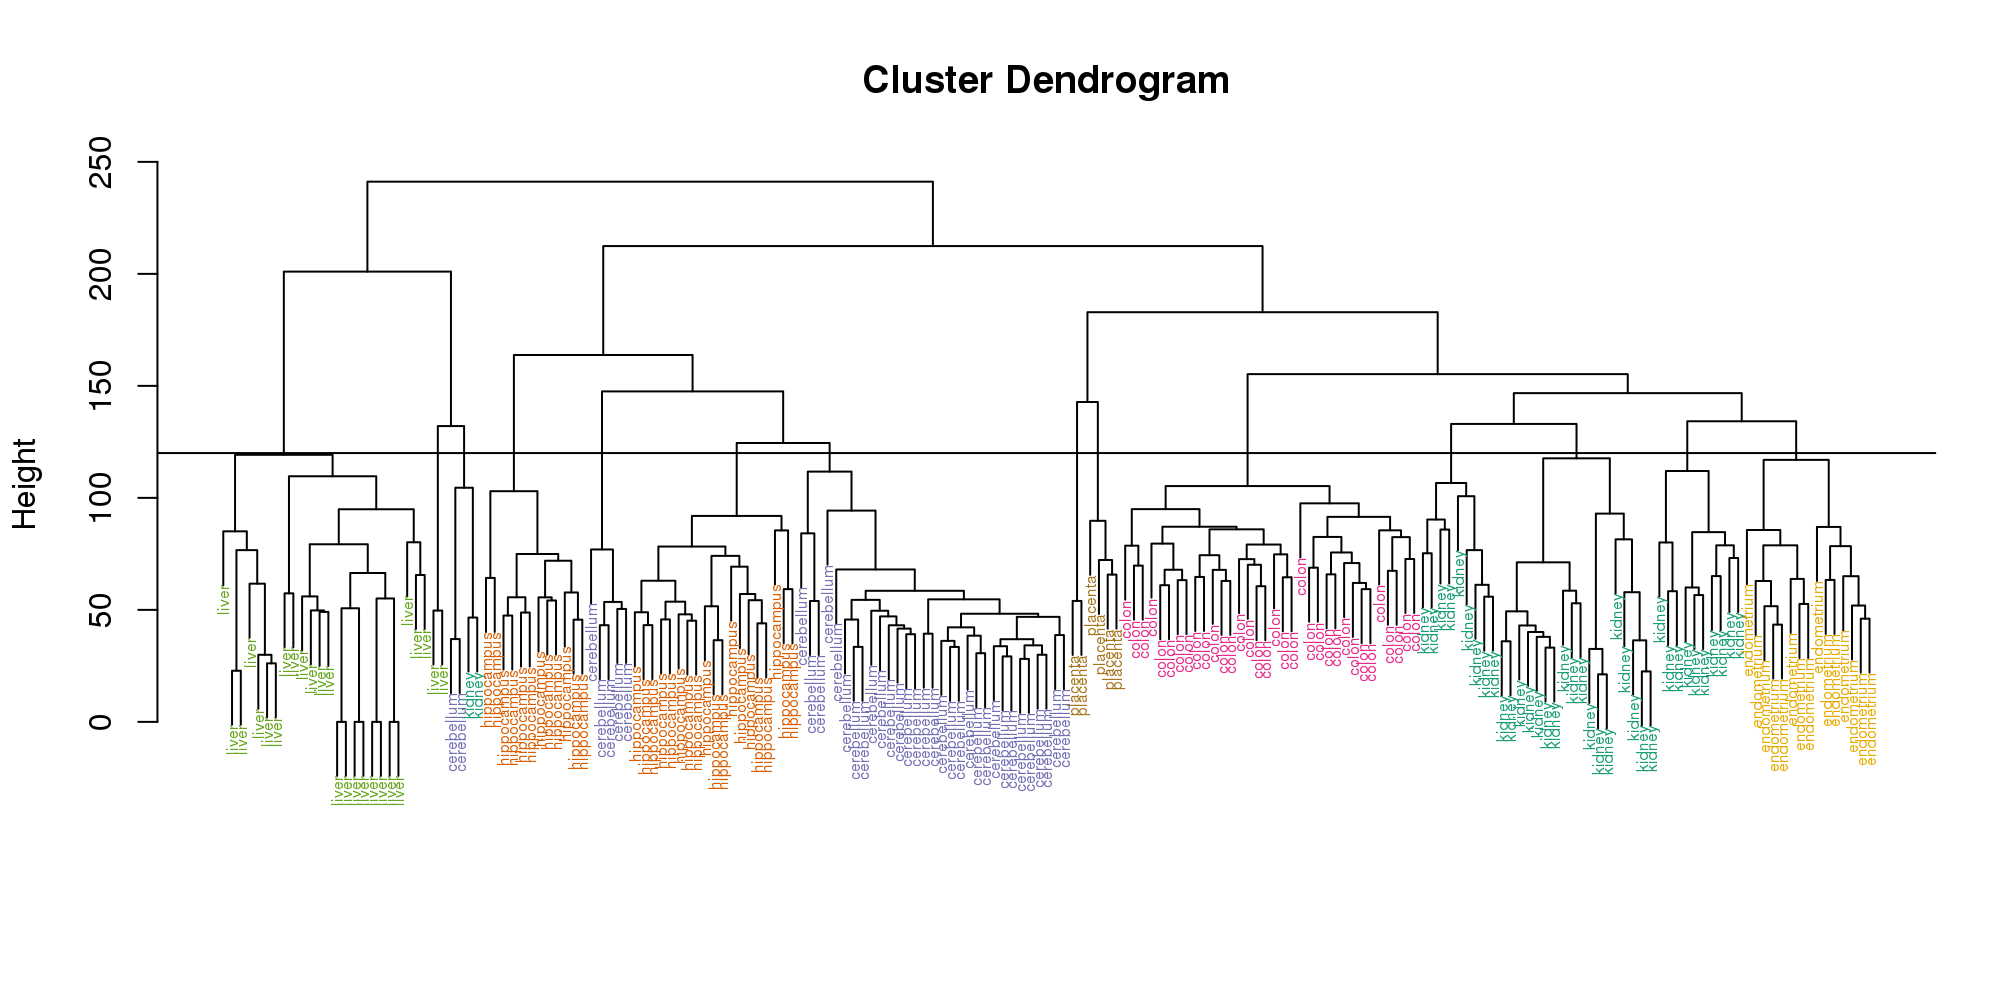 Dendrogram showing hierarchical clustering of tissue gene expression data with colors denoting tissues. Horizontal line defines actual clusters.